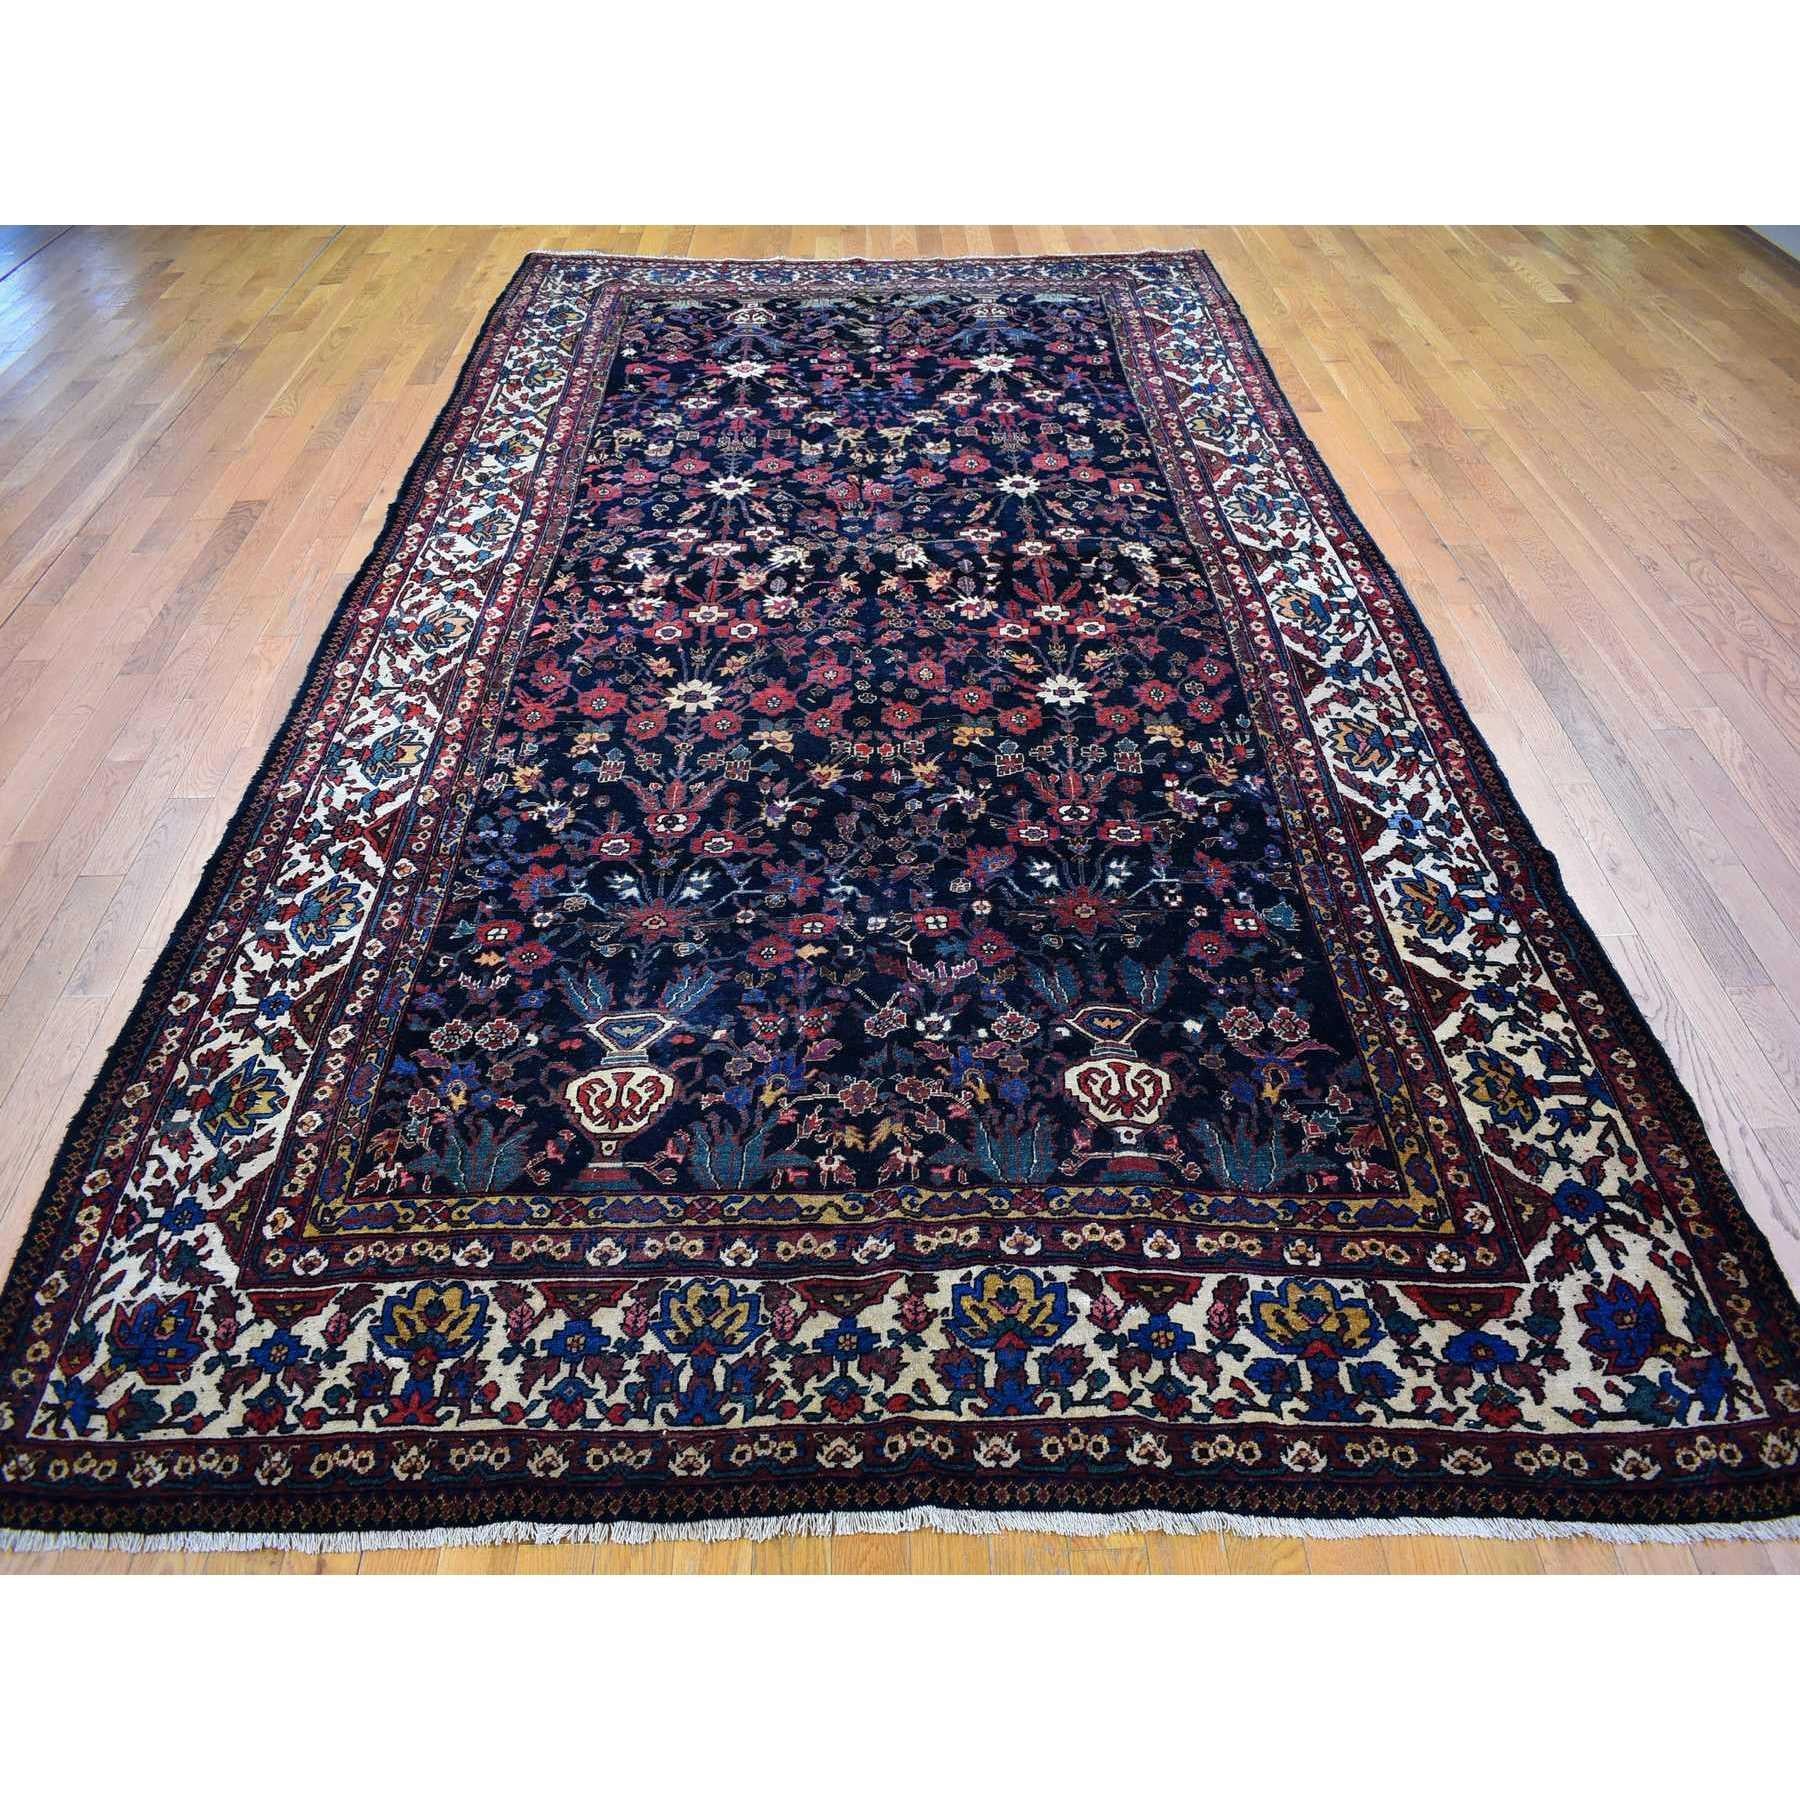 This fabulous hand-knotted carpet has been created and designed for extra strength and durability. This rug has been handcrafted for weeks in the traditional method that is used to make
Exact Rug Size in Feet and Inches : 7'2